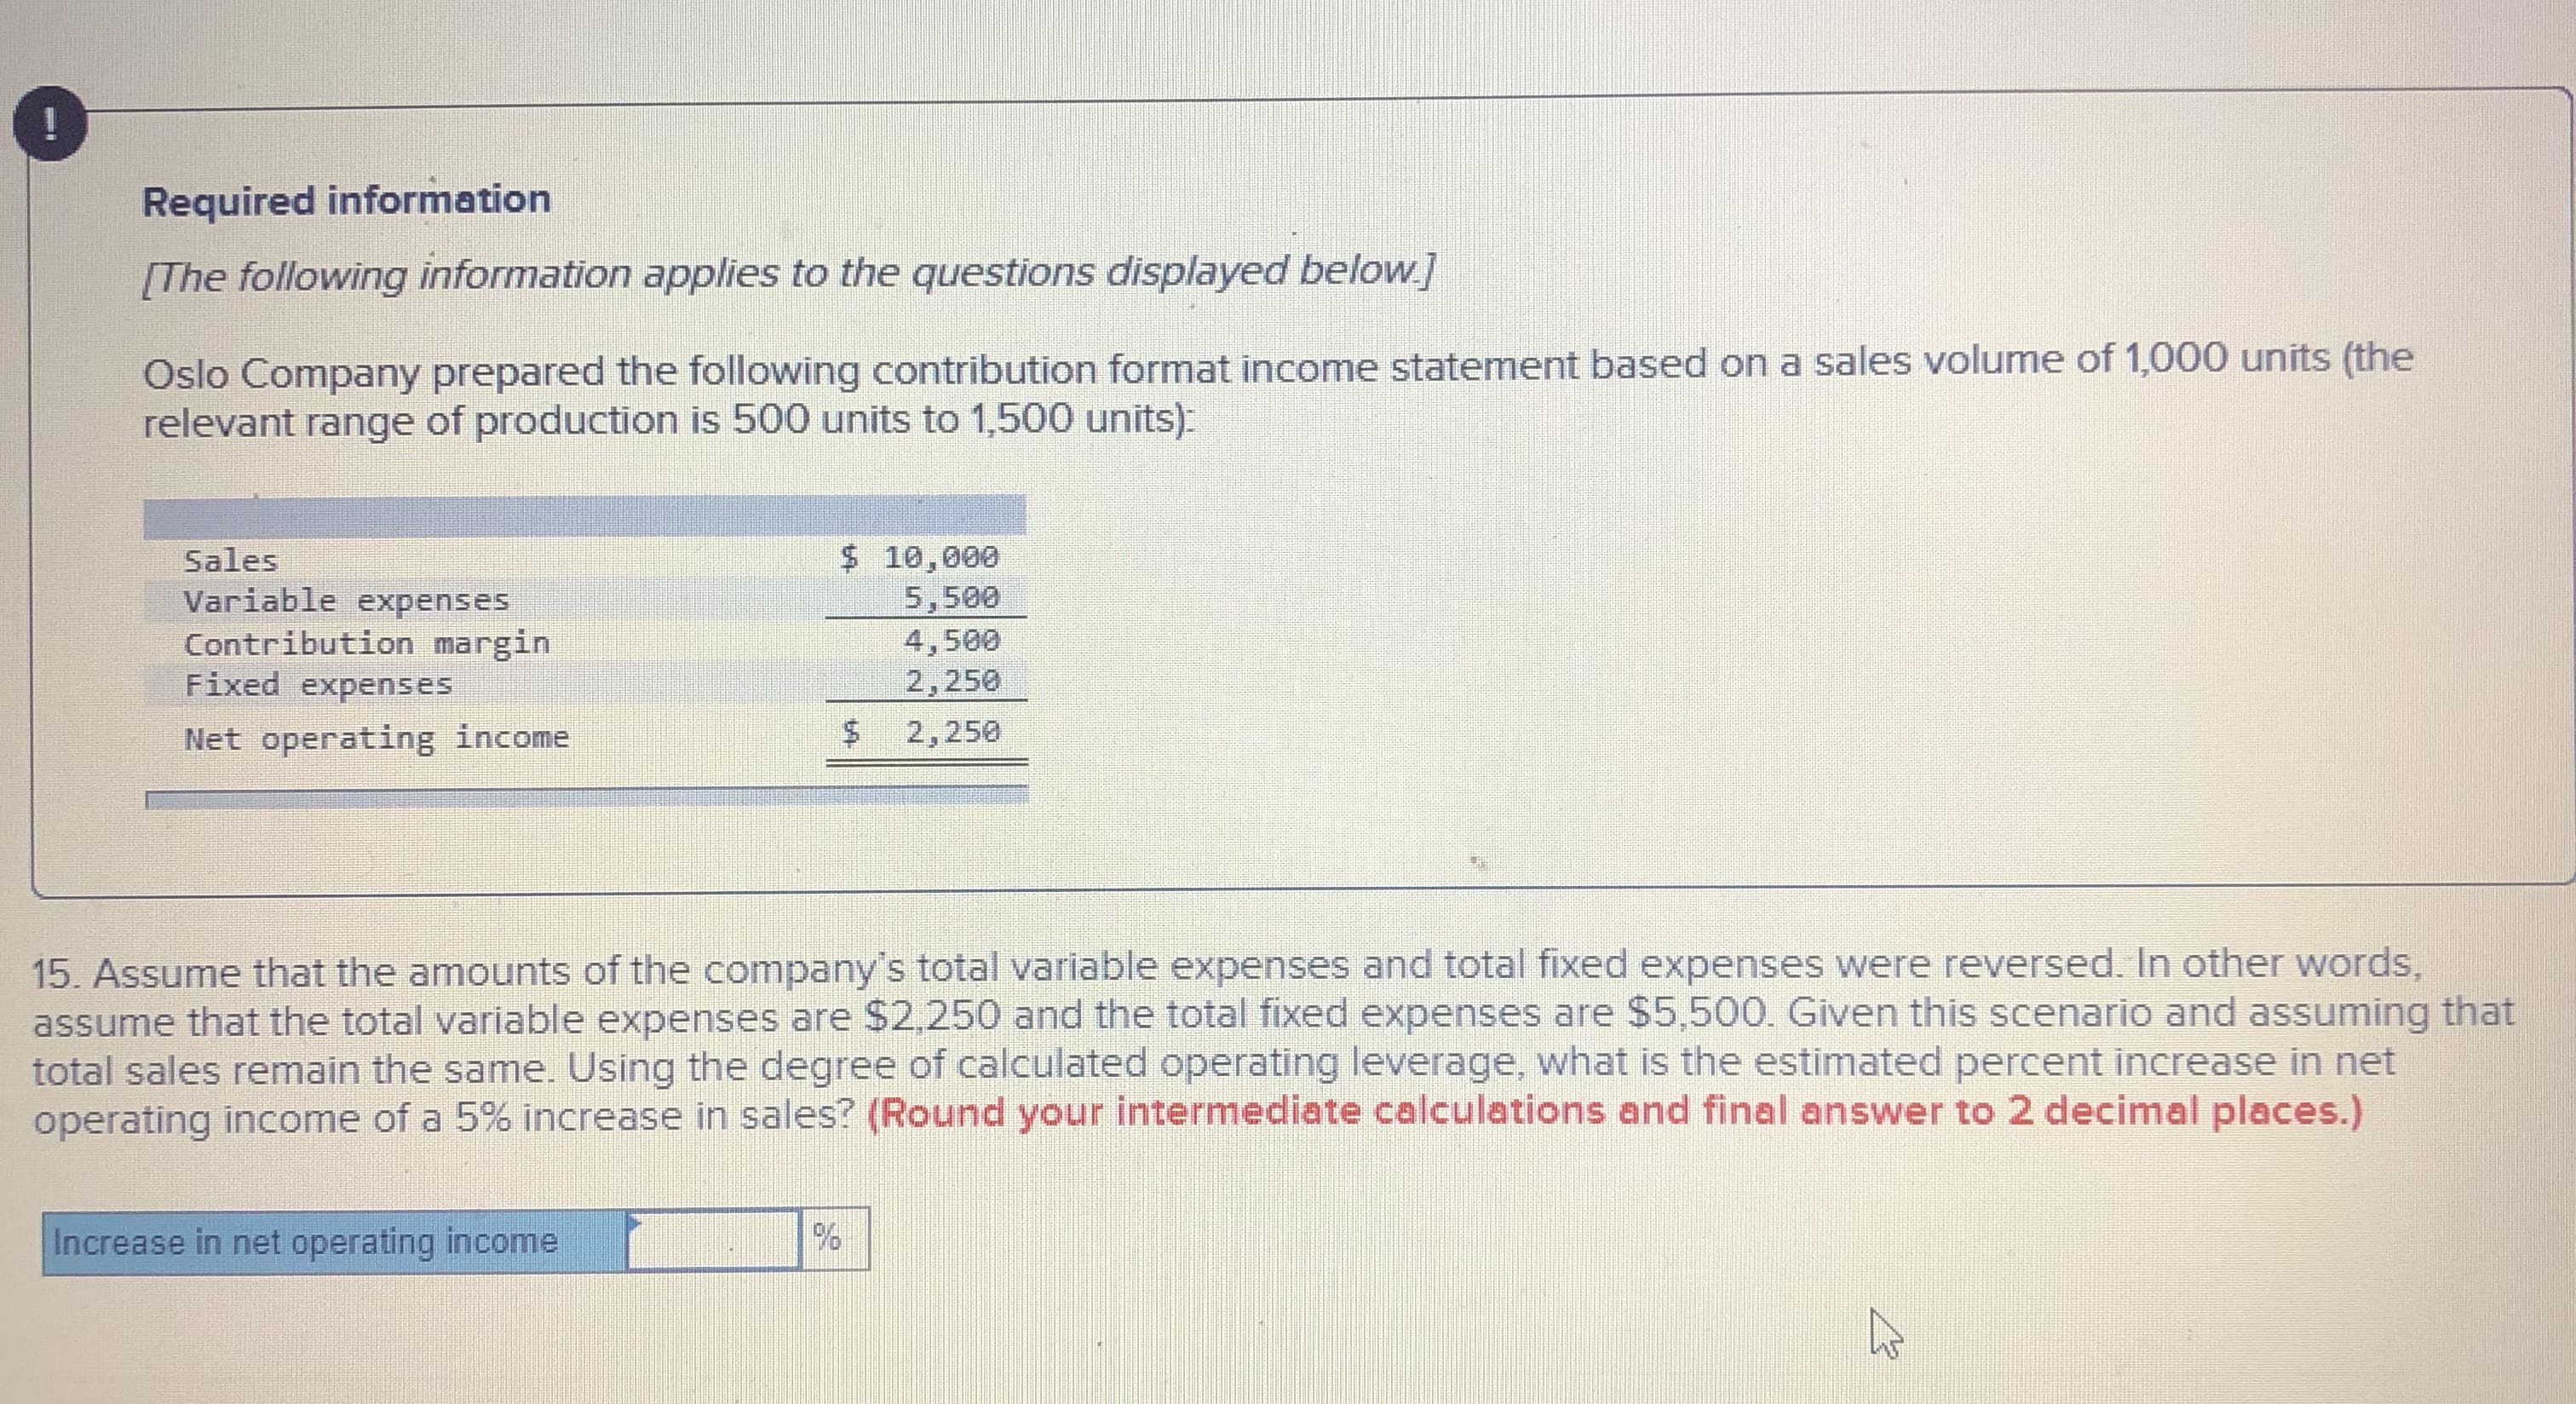 Required information
[The following information applies to the questions displayed below]
Oslo Company prepared the following contribution format income statement based on a sales volume of 1,000 units (the
relevant range of production is 500 units to 1,500 units):
$ 10,000
5,500
4,500
2,250
$ 2,250
Sales
Variable expenses
Contribution margin
Fixed expenses
Net operating income
15. Assume that the amounts of the company's total variable expenses and total fixed expenses were reversed. In other words,
assume that the total variable expenses are $2,250 and the total fixed expenses are $5,500. Given this scenario and assuming that
total sales remain the same. Using the degree of calculated operating leverage, what is the estimated percent increase in net
operating income of a 5% increase in sales? (Round your intermediate calculations and final answer to 2 decimal places.)
Increase in net operating income
